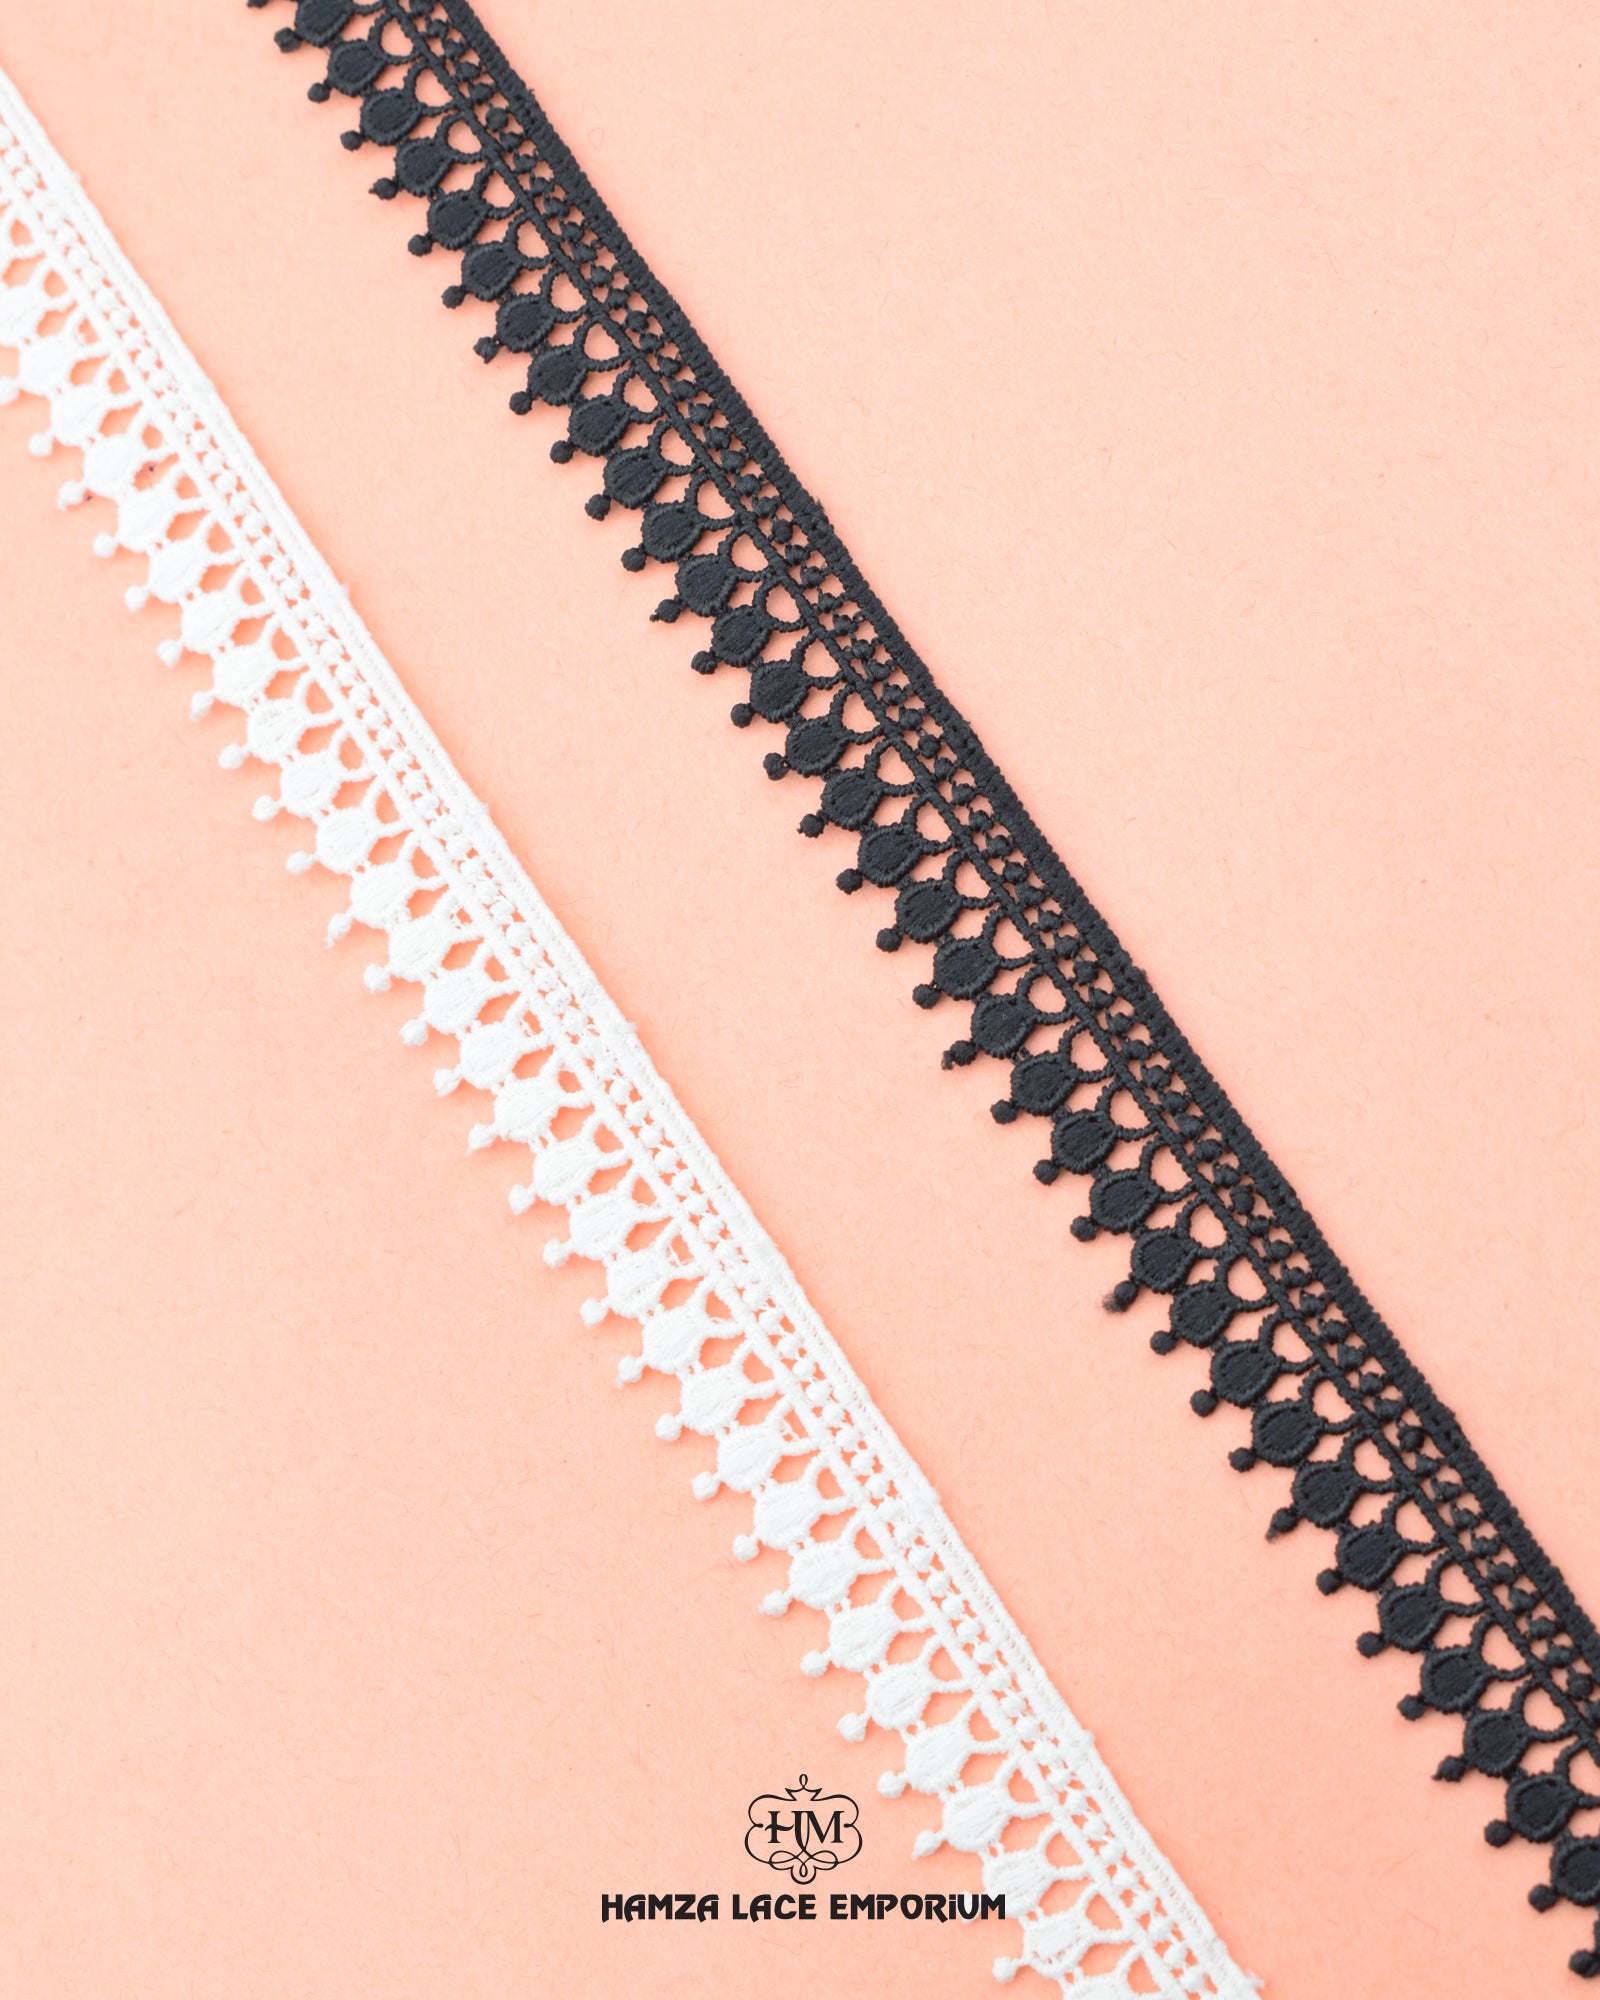 two 'Edging Loop Lace 21962' is placed side by side on a pink peace of fiber with the brand name 'Hamza Lace' at the bottom